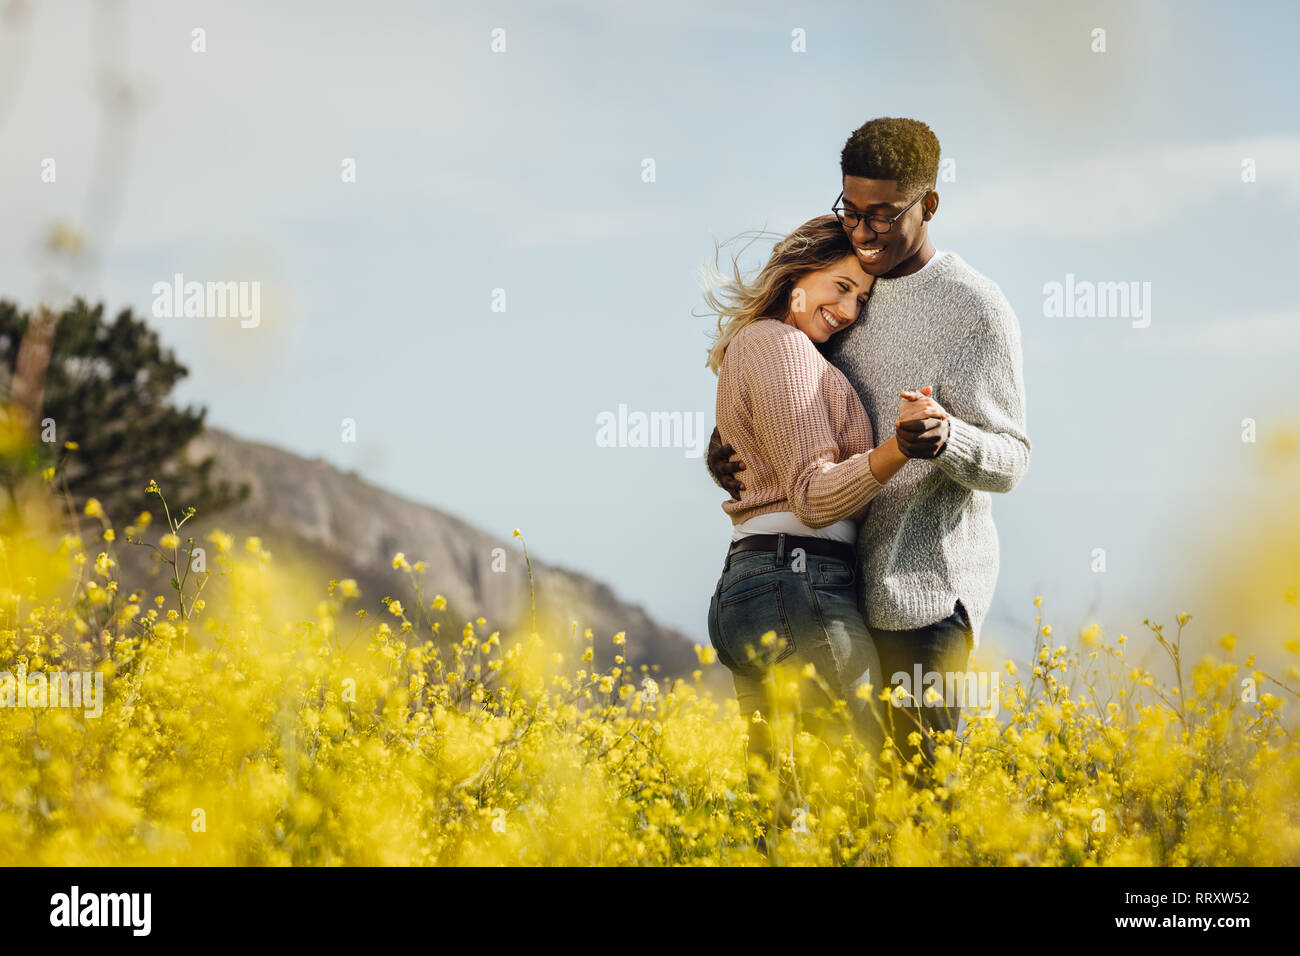 Happy couple dancing together outdoors. African man and caucasian woman enjoying a quality time together. Stock Photo